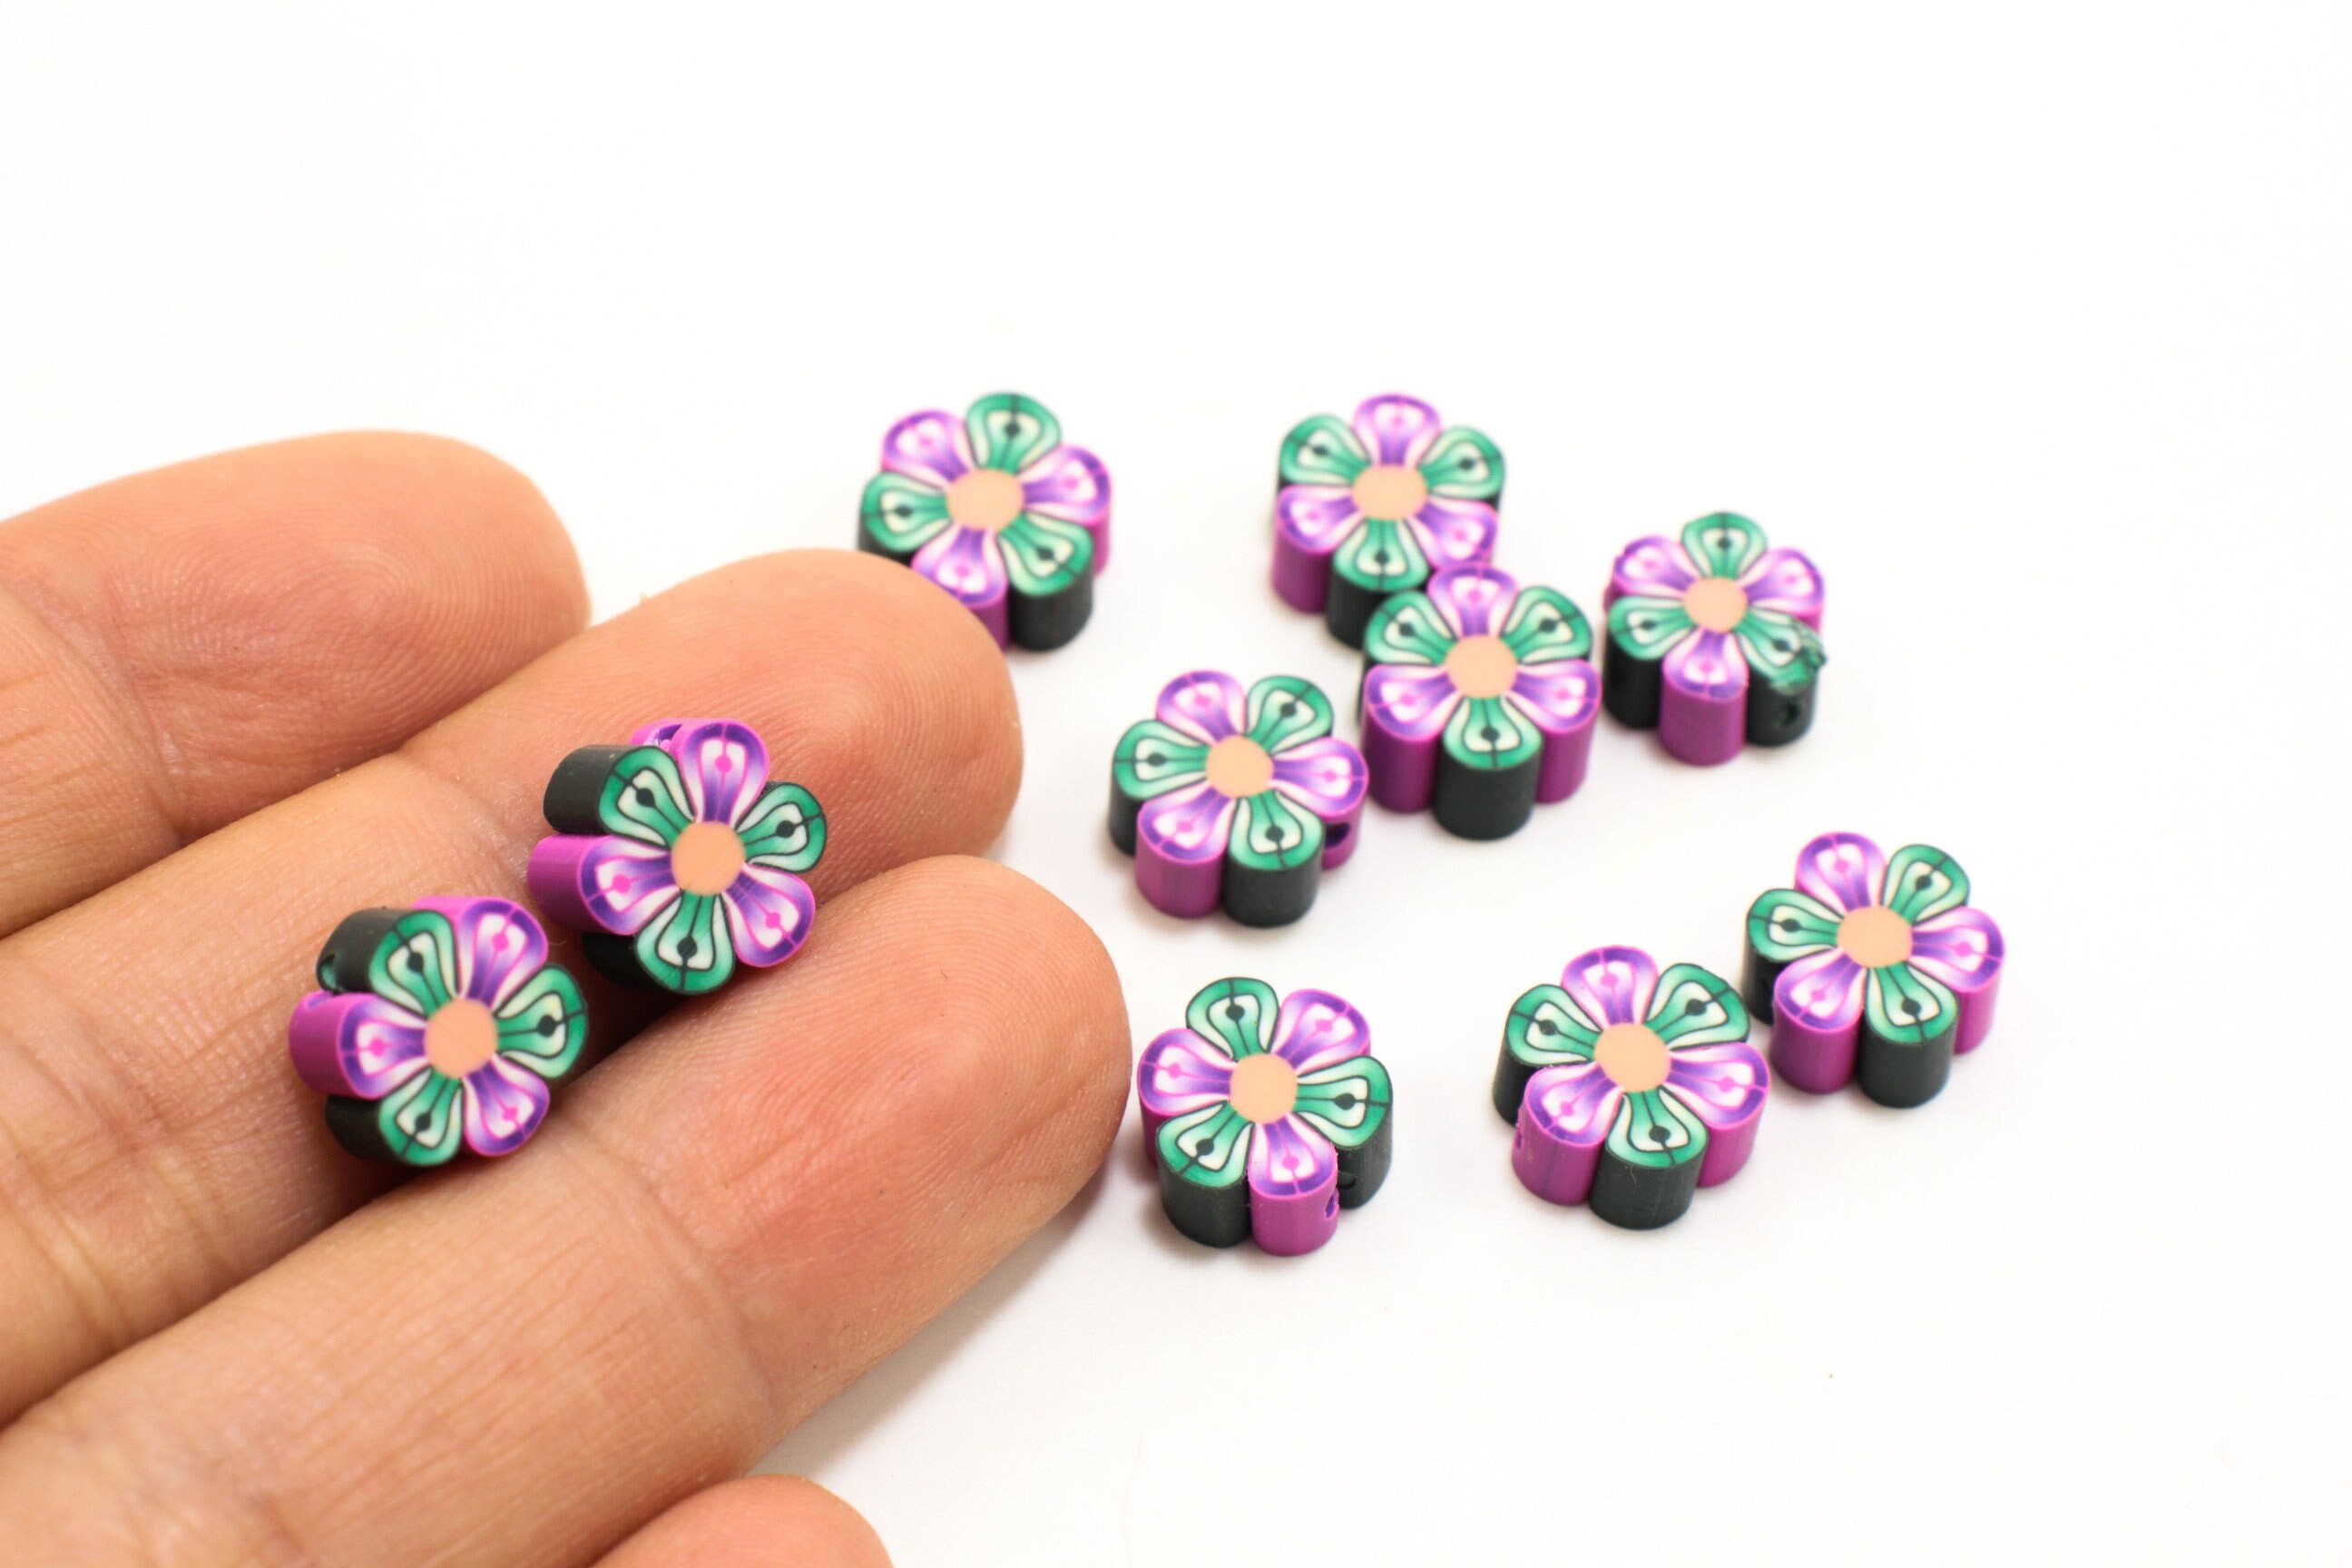 Fimo Polymer Clay Beads, Round Shape Colorfull Beads, Multi-Size Spacer  Fimo Polymer Beads 120 Pcs